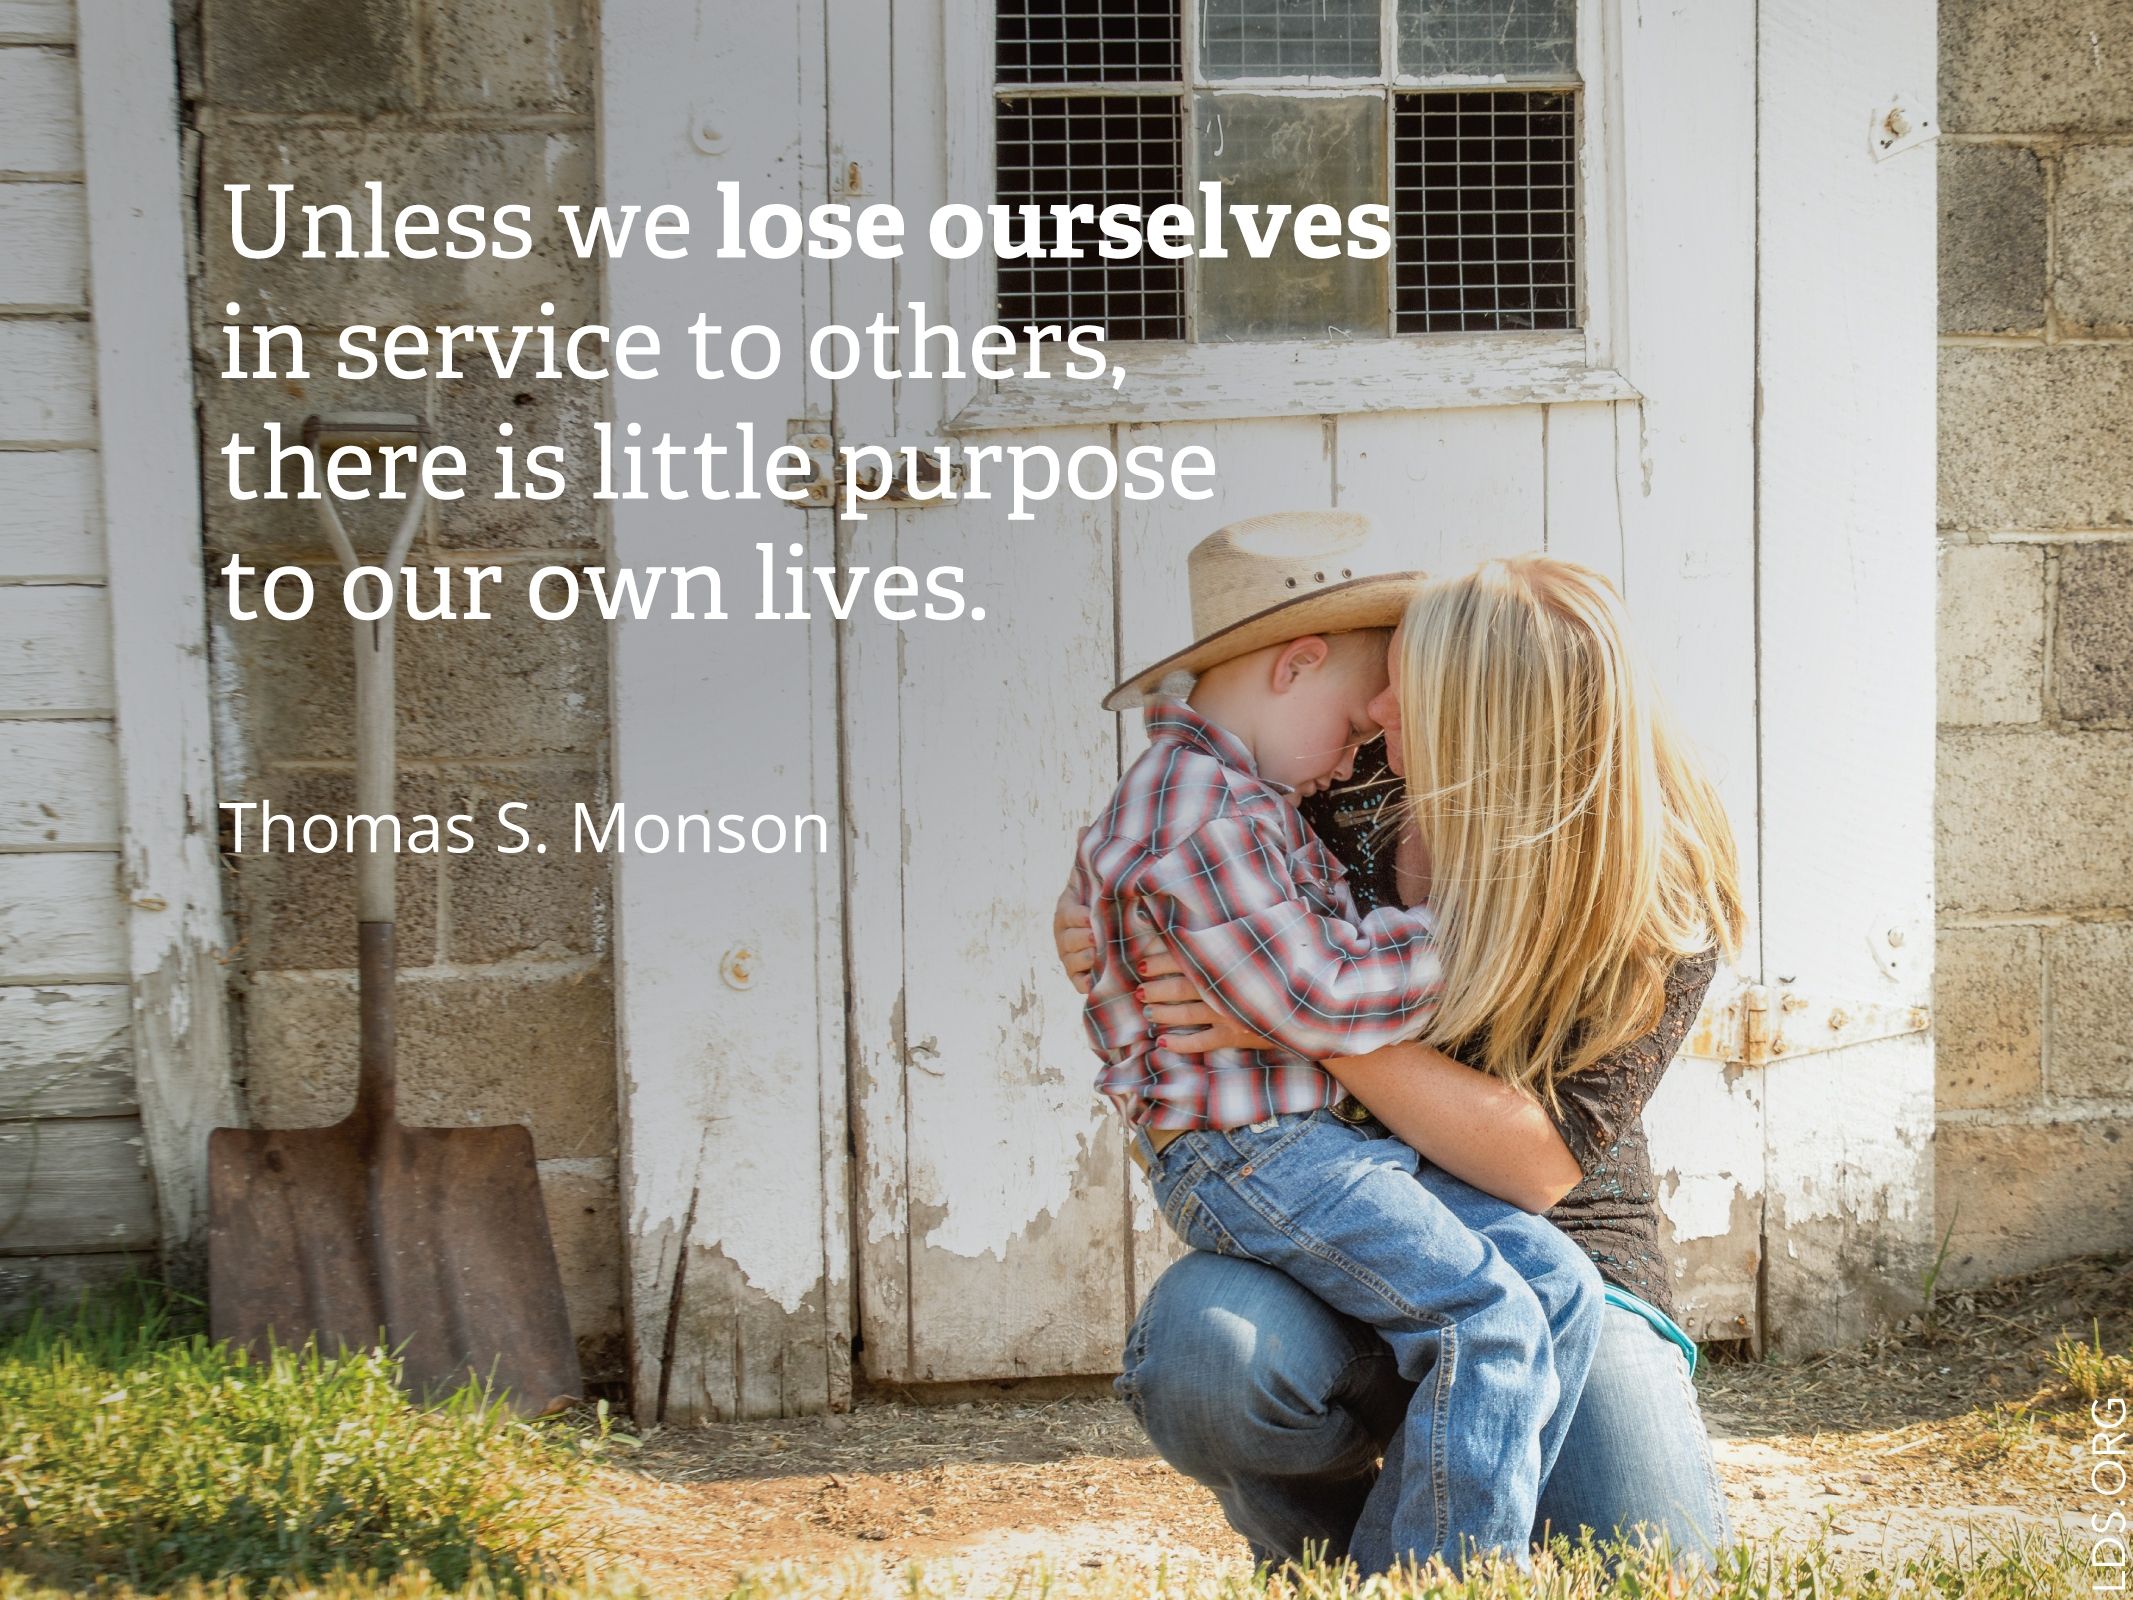 “Unless we lose ourselves in service to others, there is little purpose to our own lives.”—President Thomas S. Monson, “What Have I Done for Someone Today?” © See Individual Images ipCode 1.